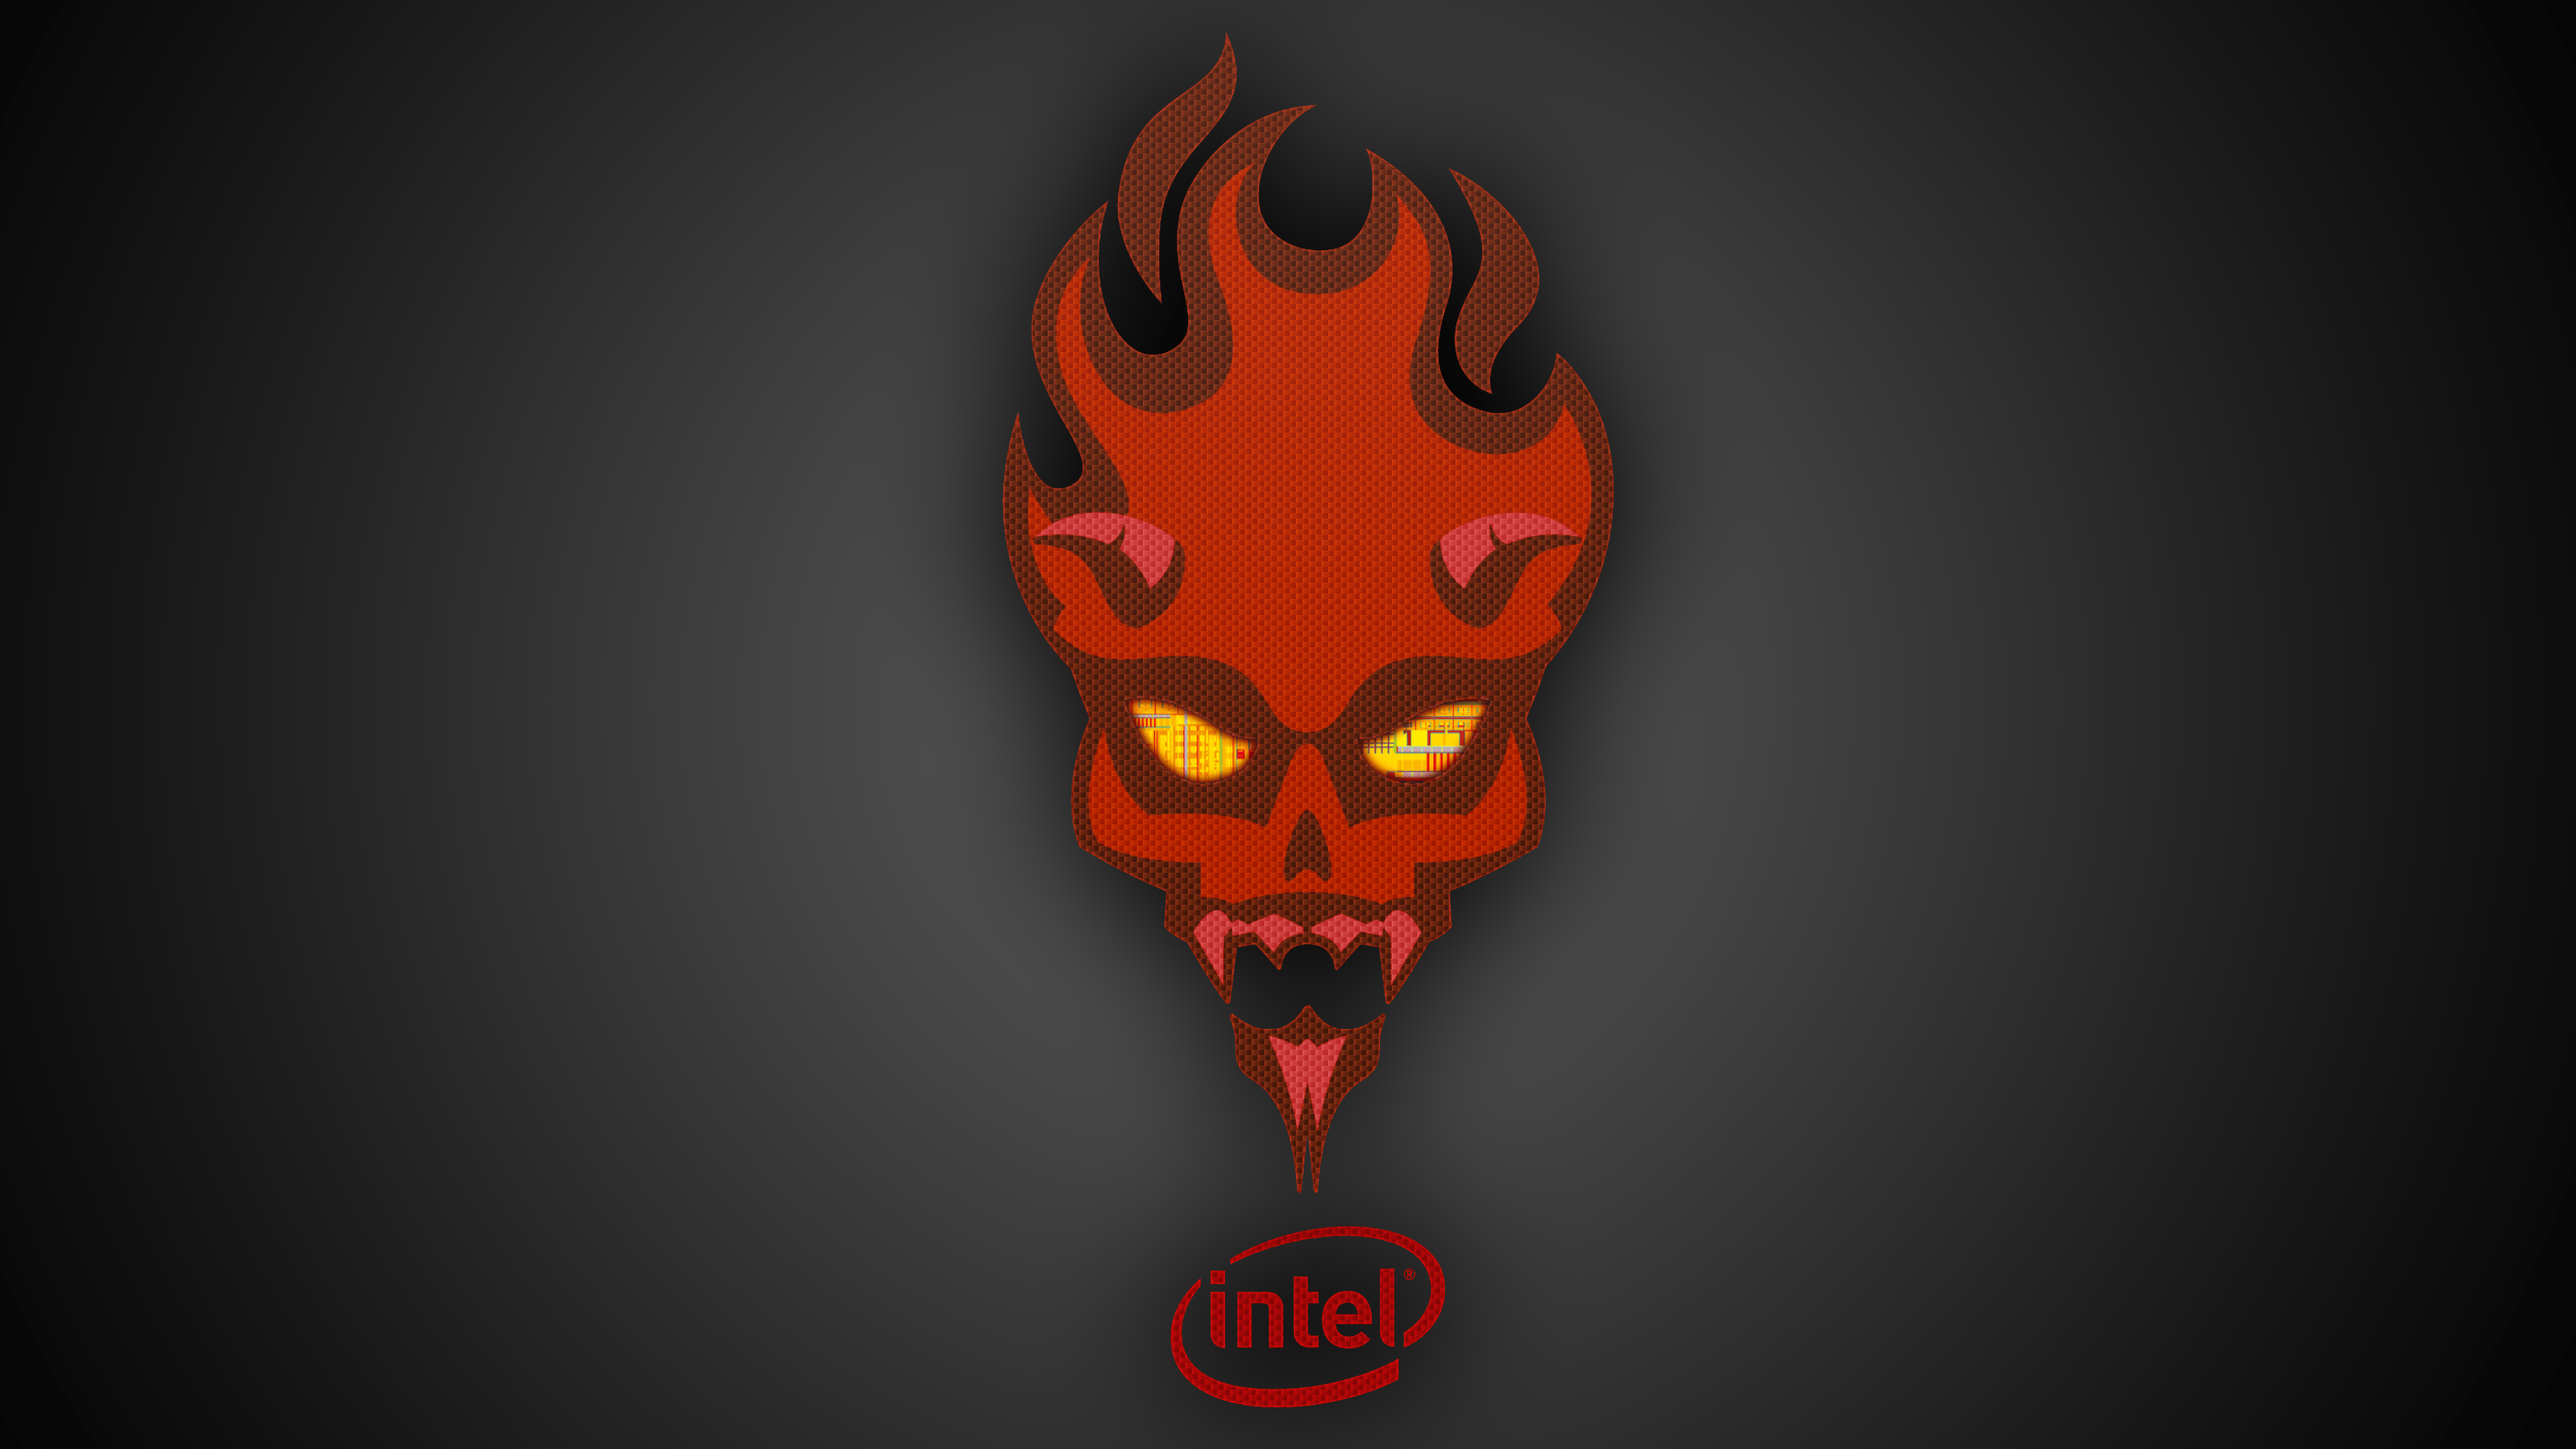 Red Intel Logo - 4K] Intel Devil's Canyon Background (Red) : pcmasterrace